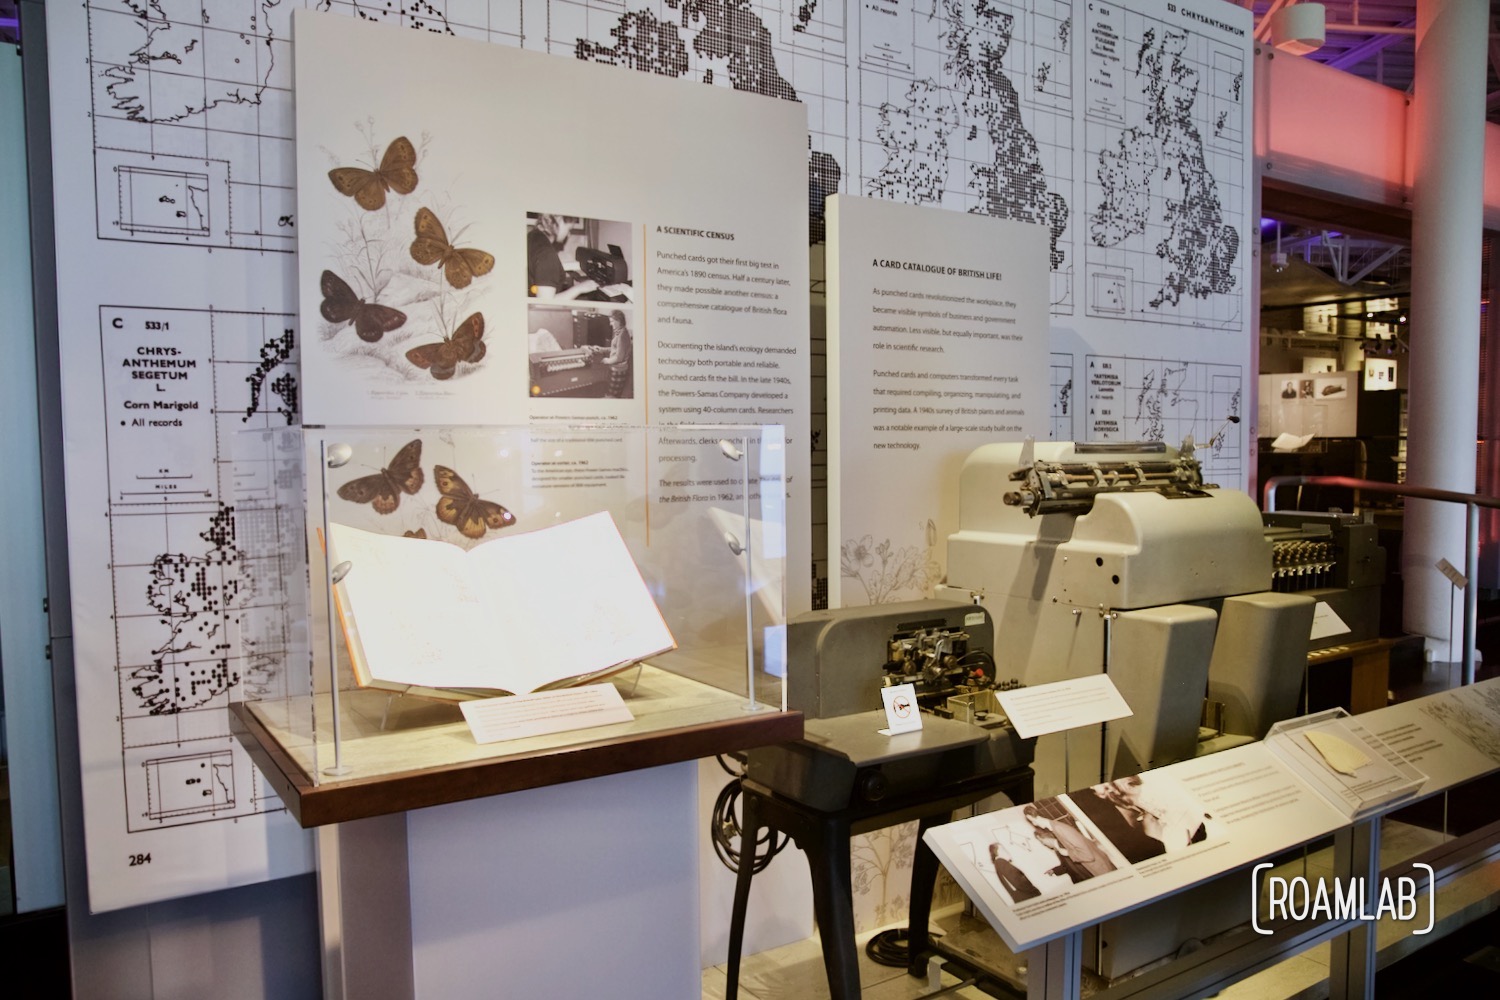 Display of early punch cards, machine, and other early data records.